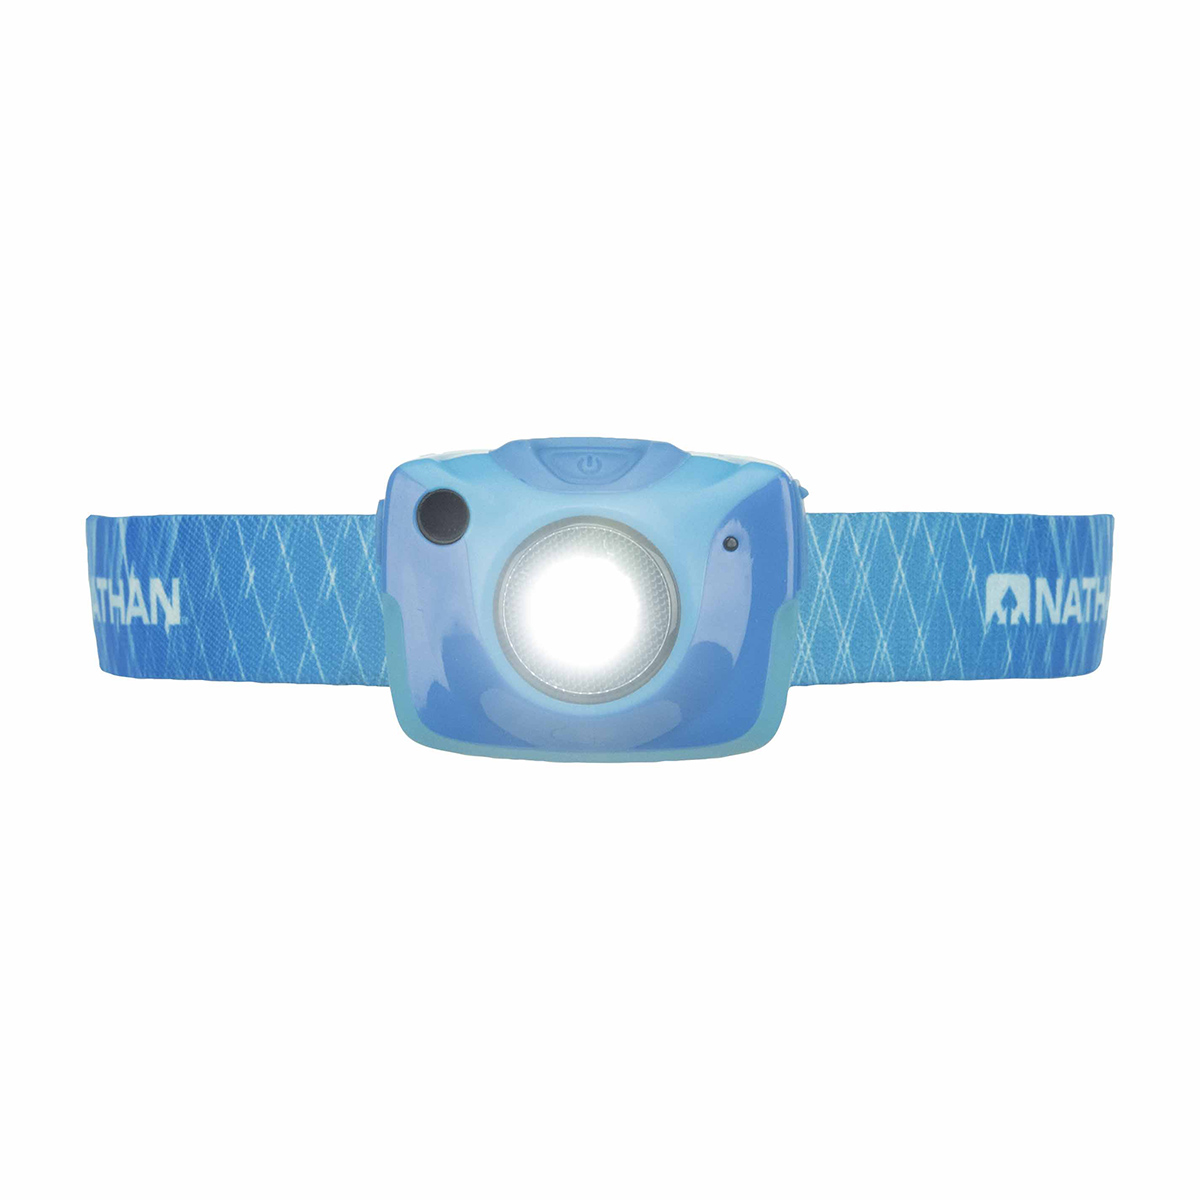 Nathan Nebula Fire Runner's Headlamp, , large image number null